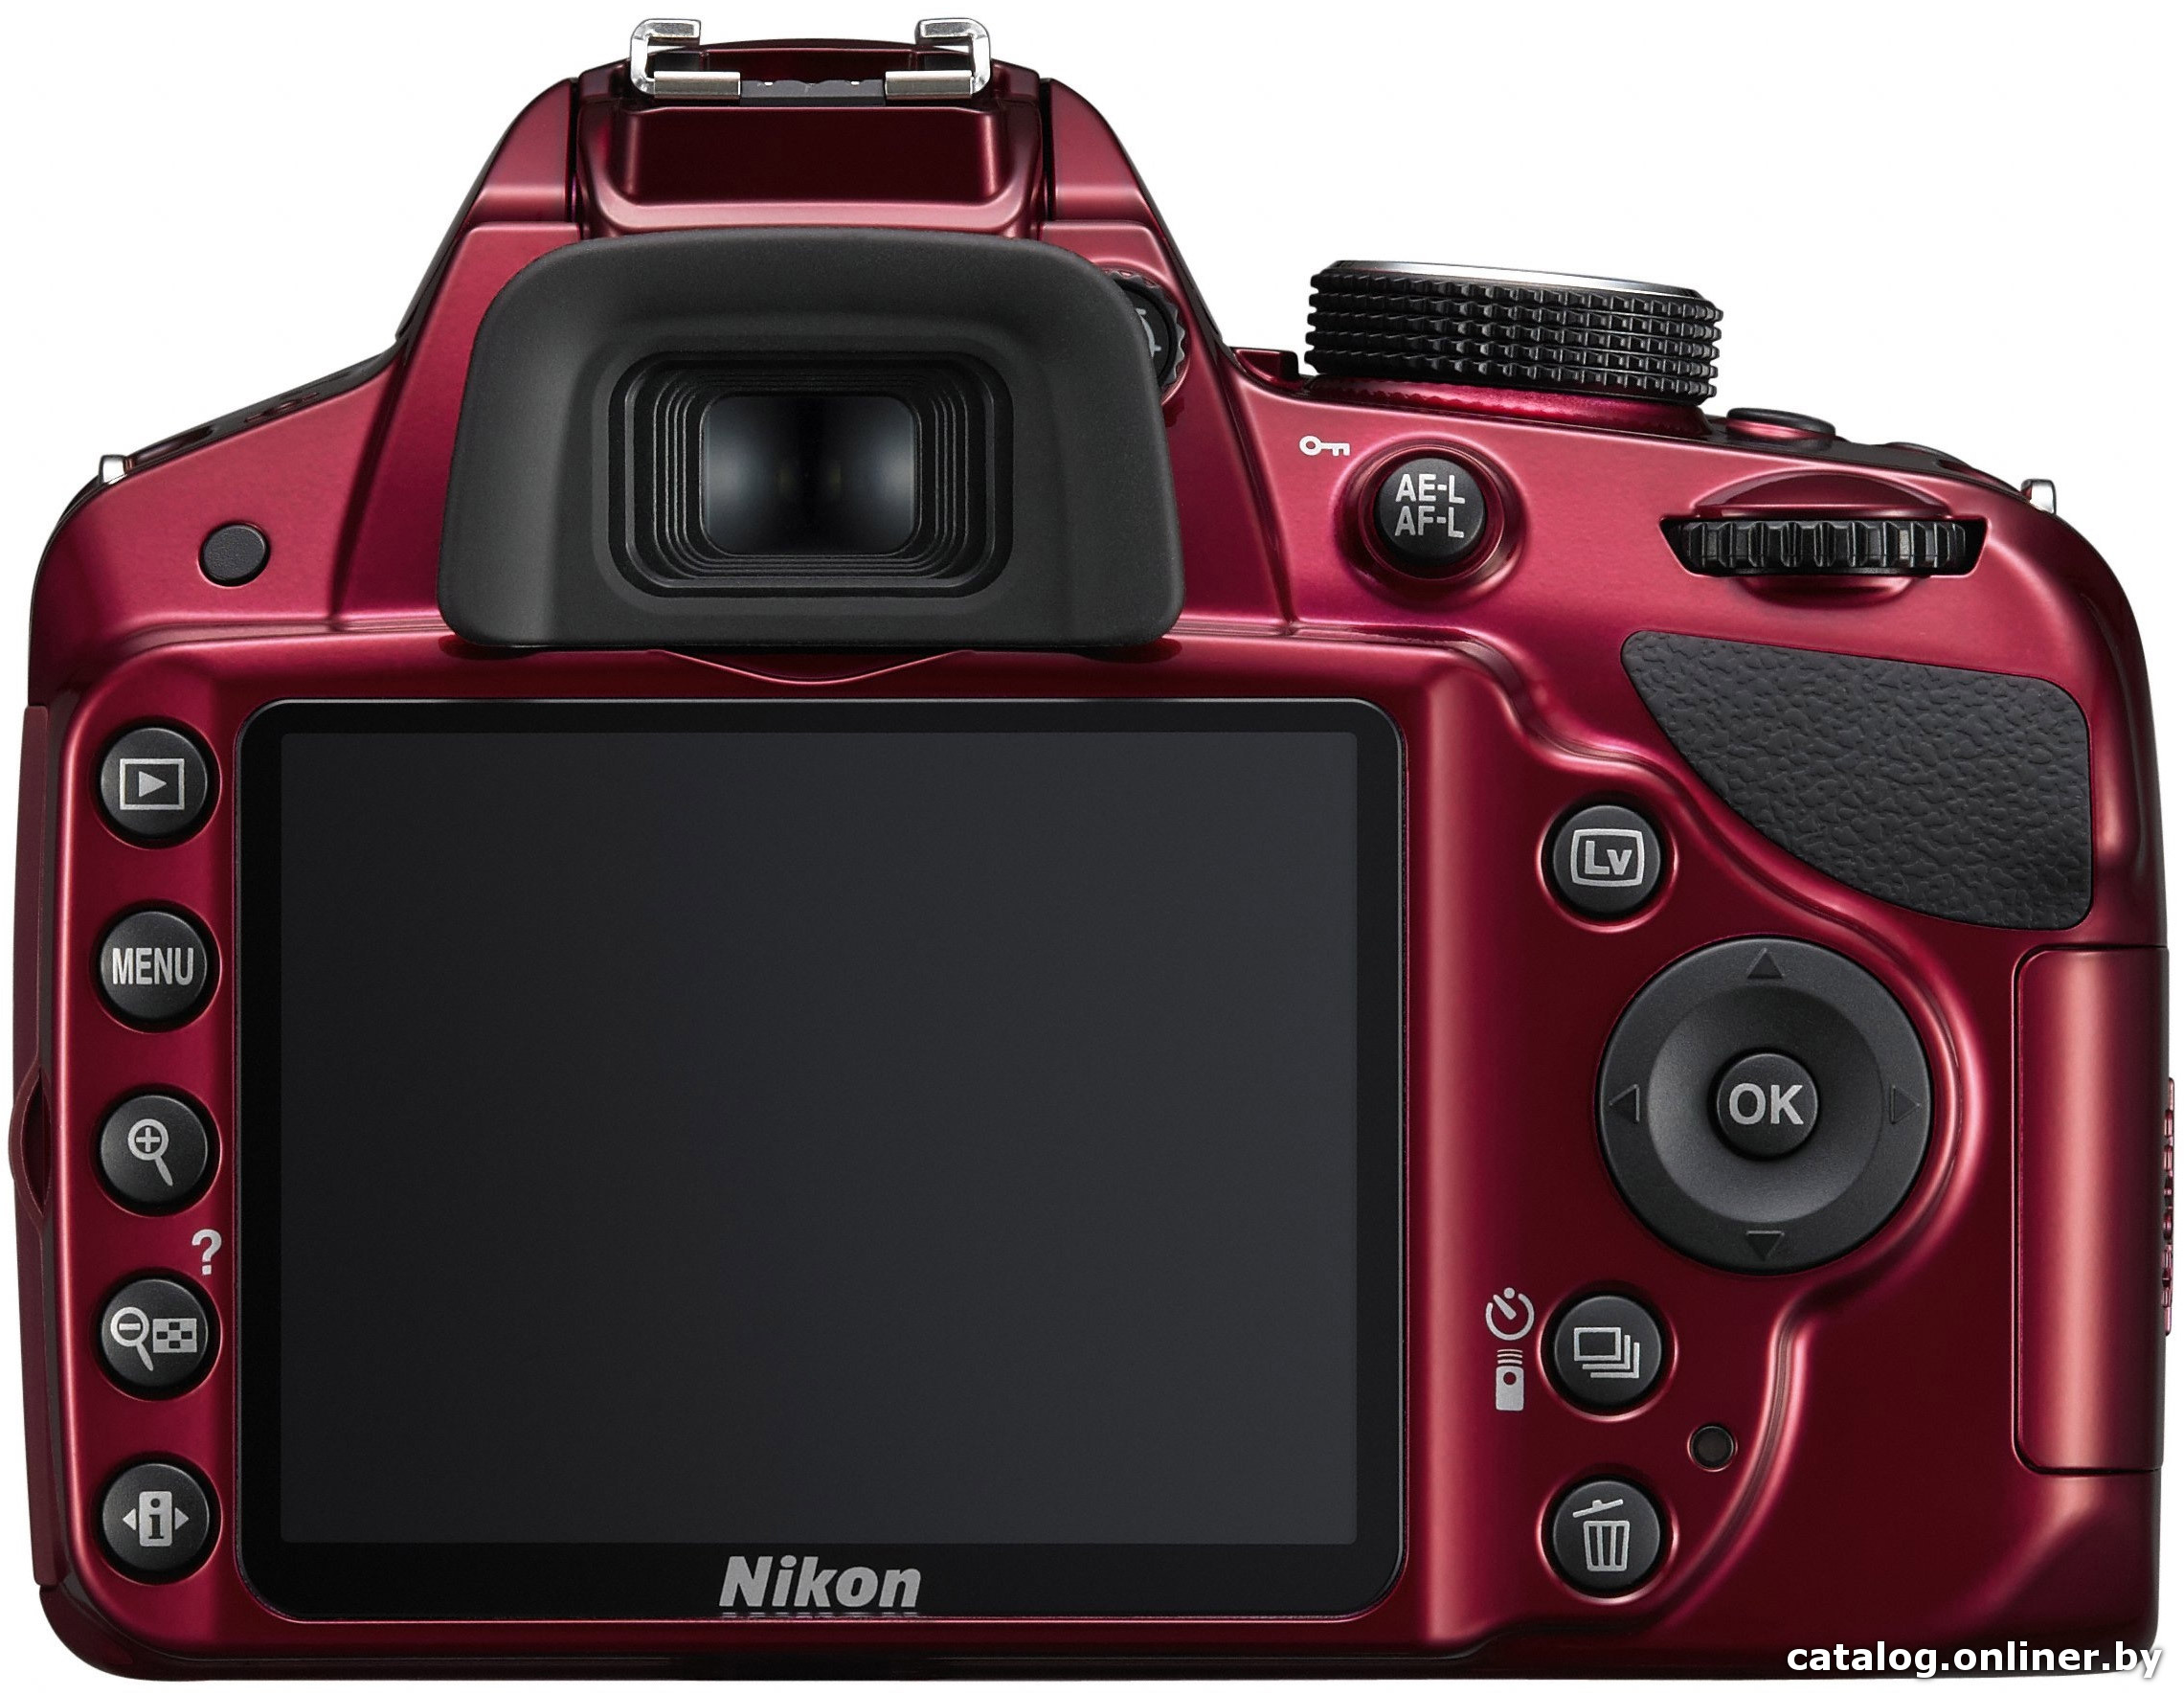 Live View Software For Nikon D3200